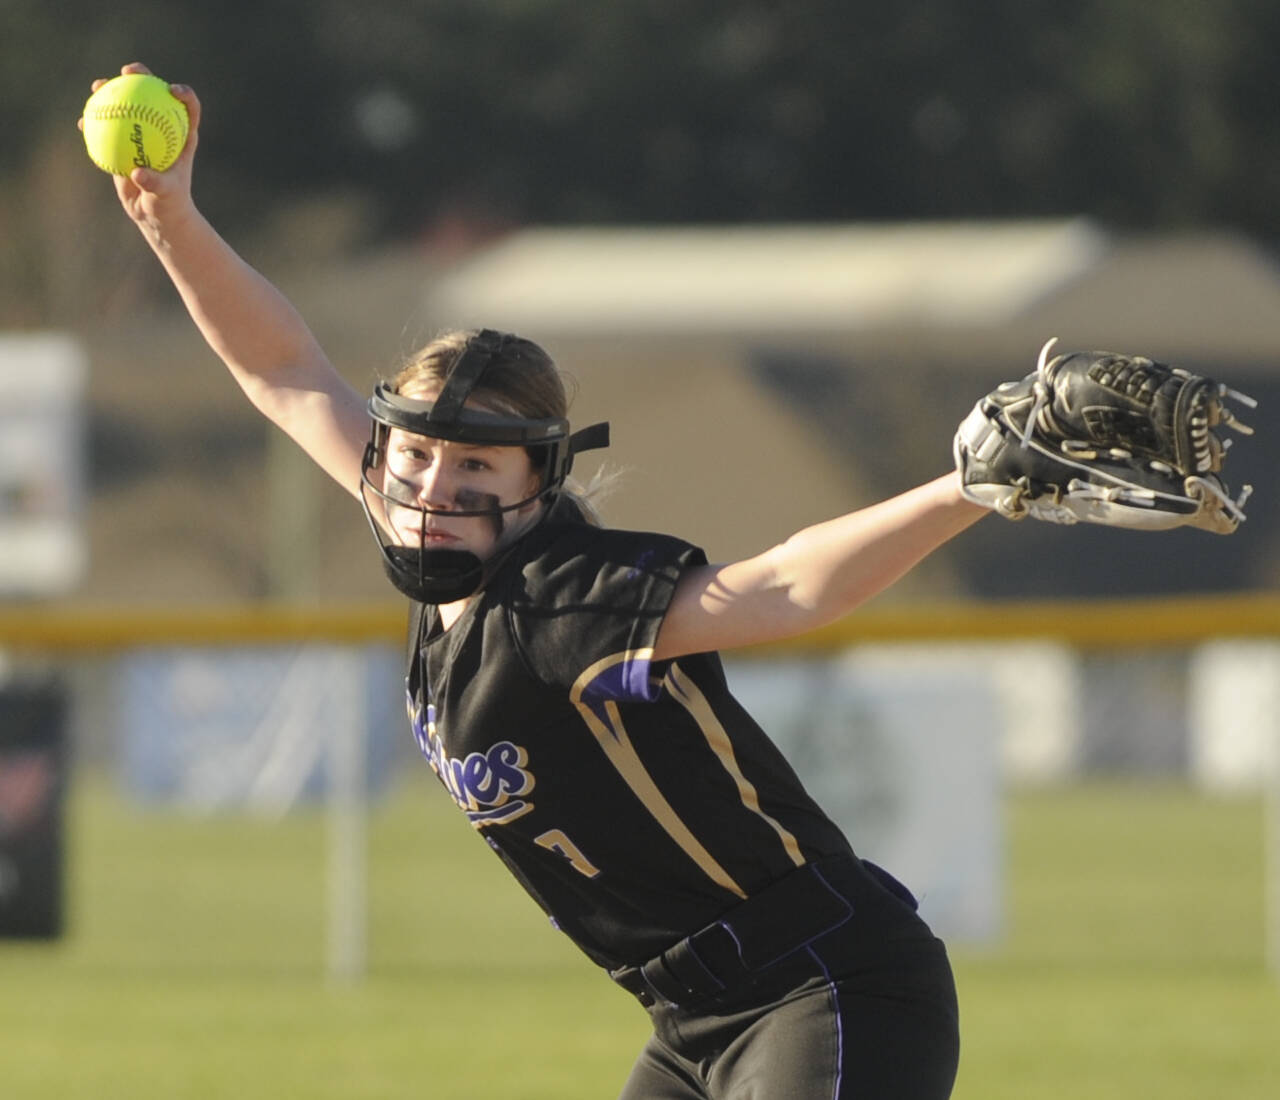 Sequim Gazette photo by Michael Dashiell
Sequim’s Rylin Whitehead pitches in relief as the Wolves host Bainbridge on March 19. The visiting Spartans edged the Wolves 15-13 in a back-and-forth league contest.